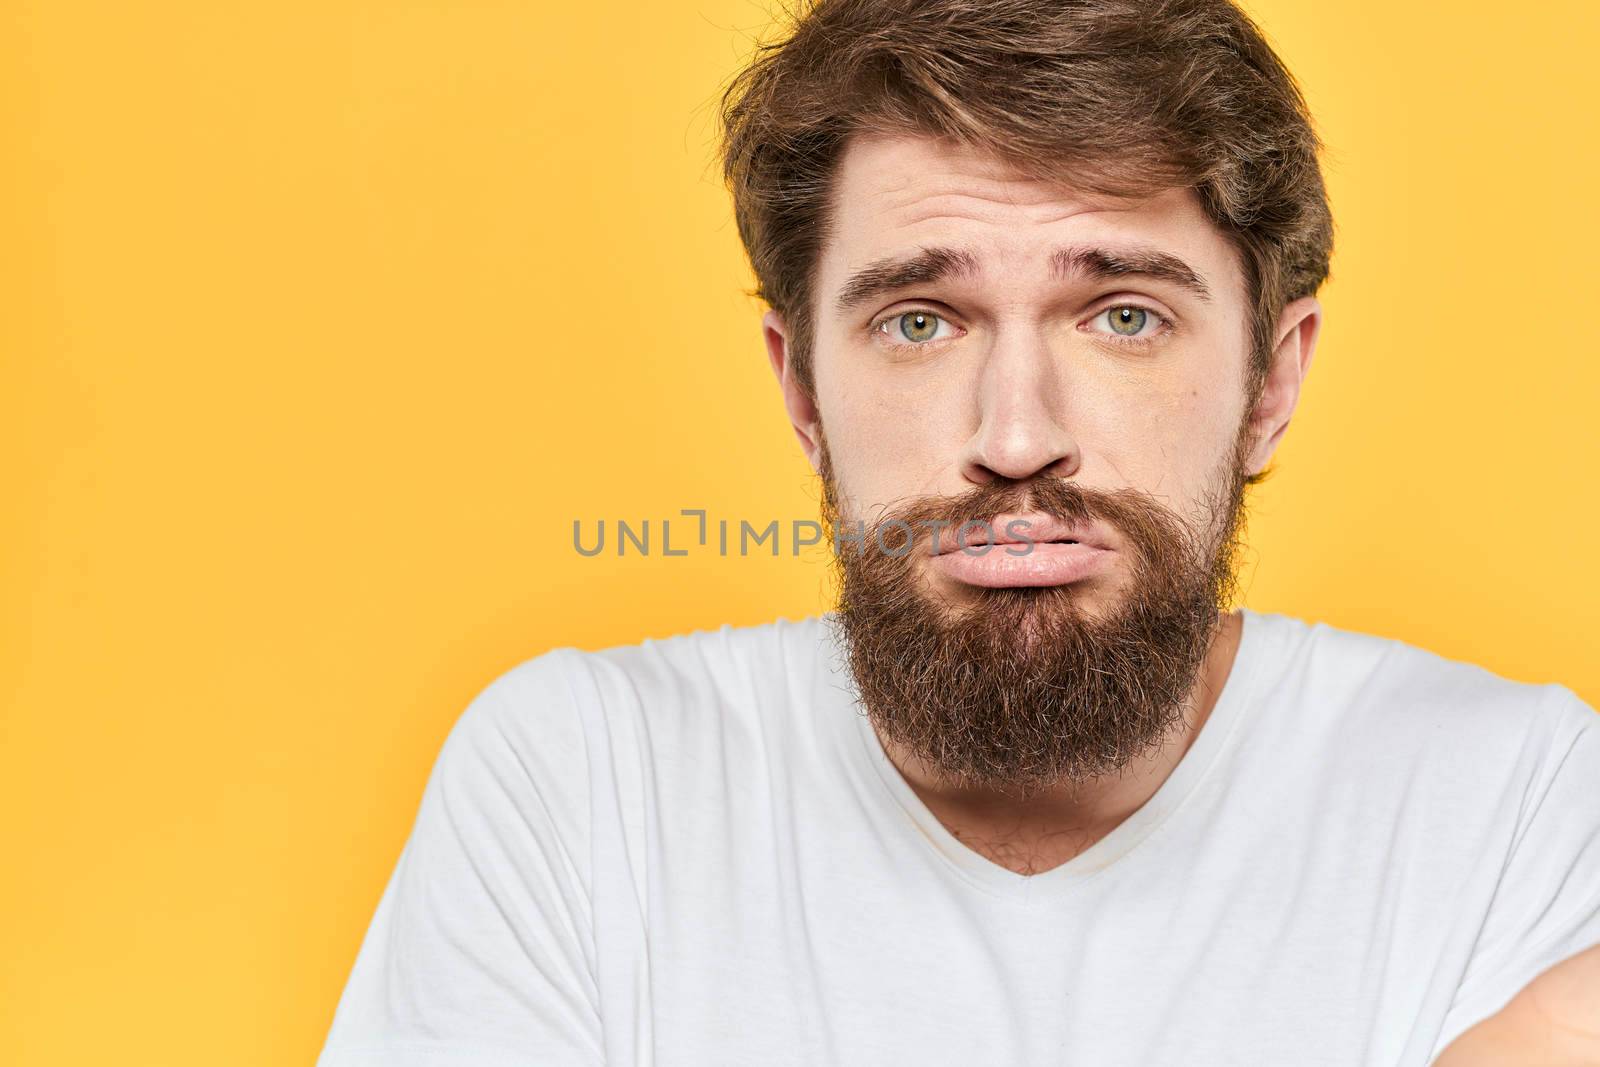 Man in white t-shirt emotions studio gestures with hands displeased facial expression yellow background. High quality photo